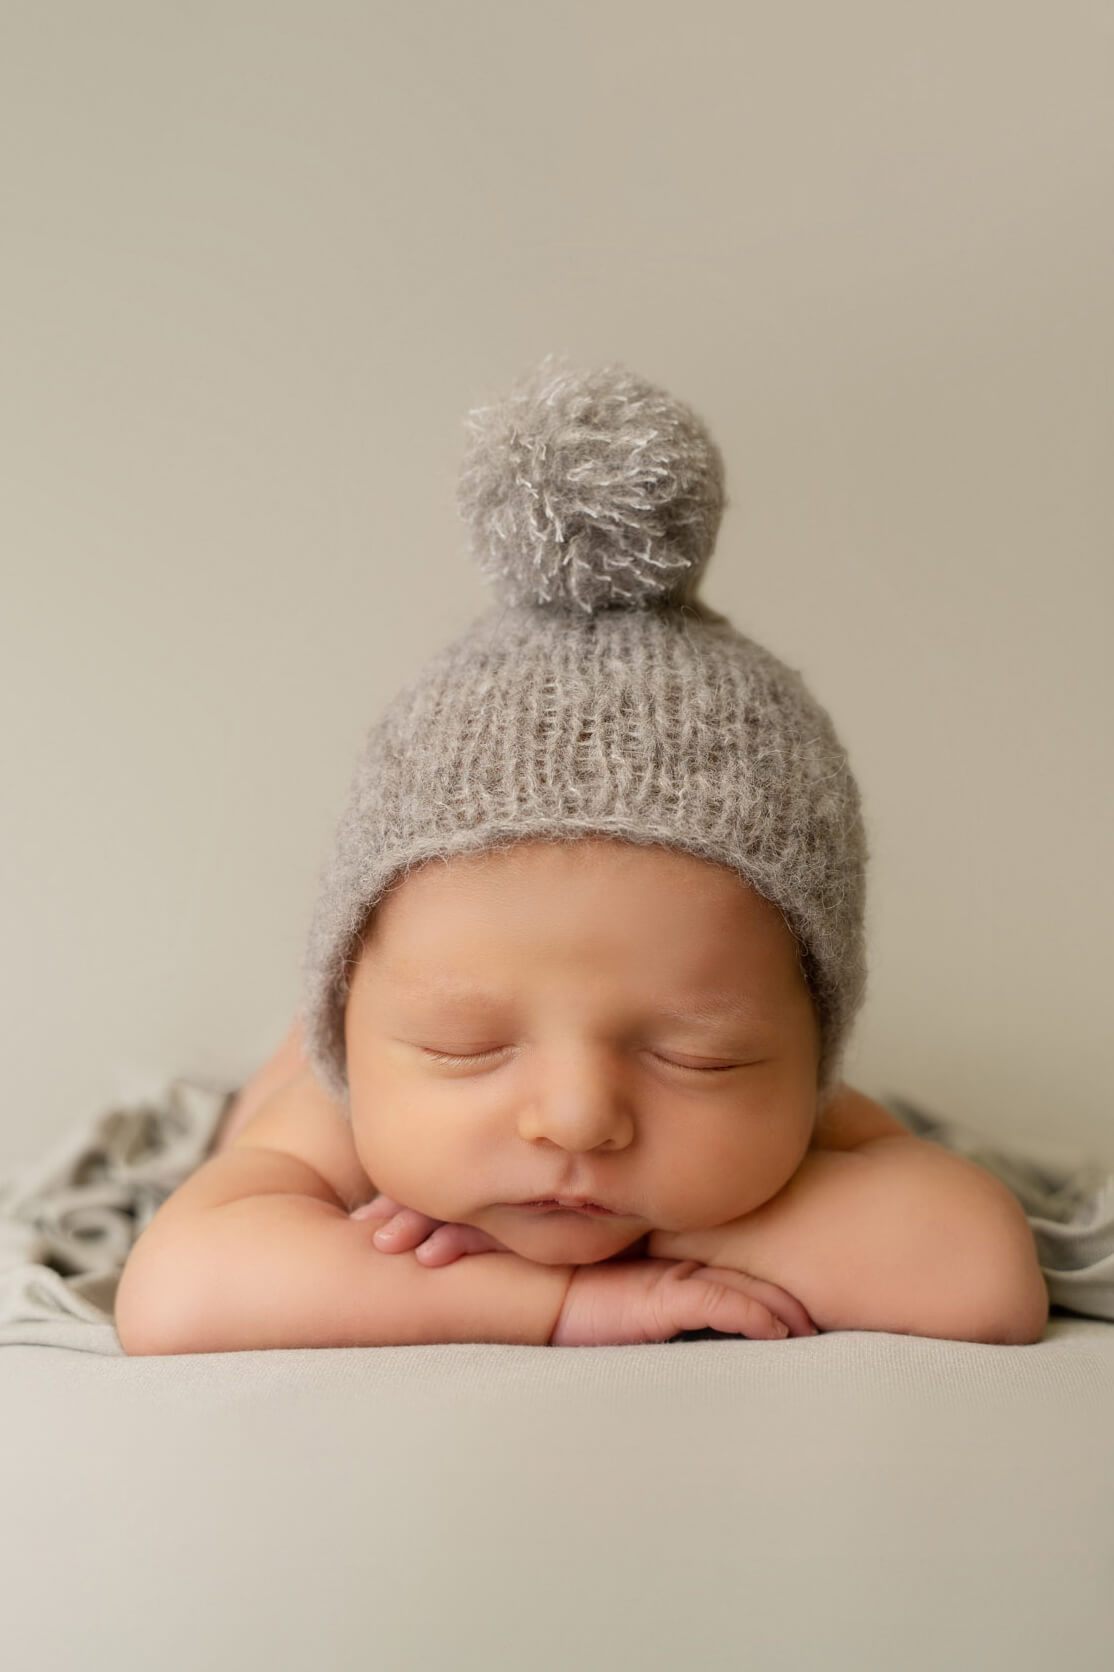 A baby is laying on a khaki green blanket. She has also a little knitted cap on her head